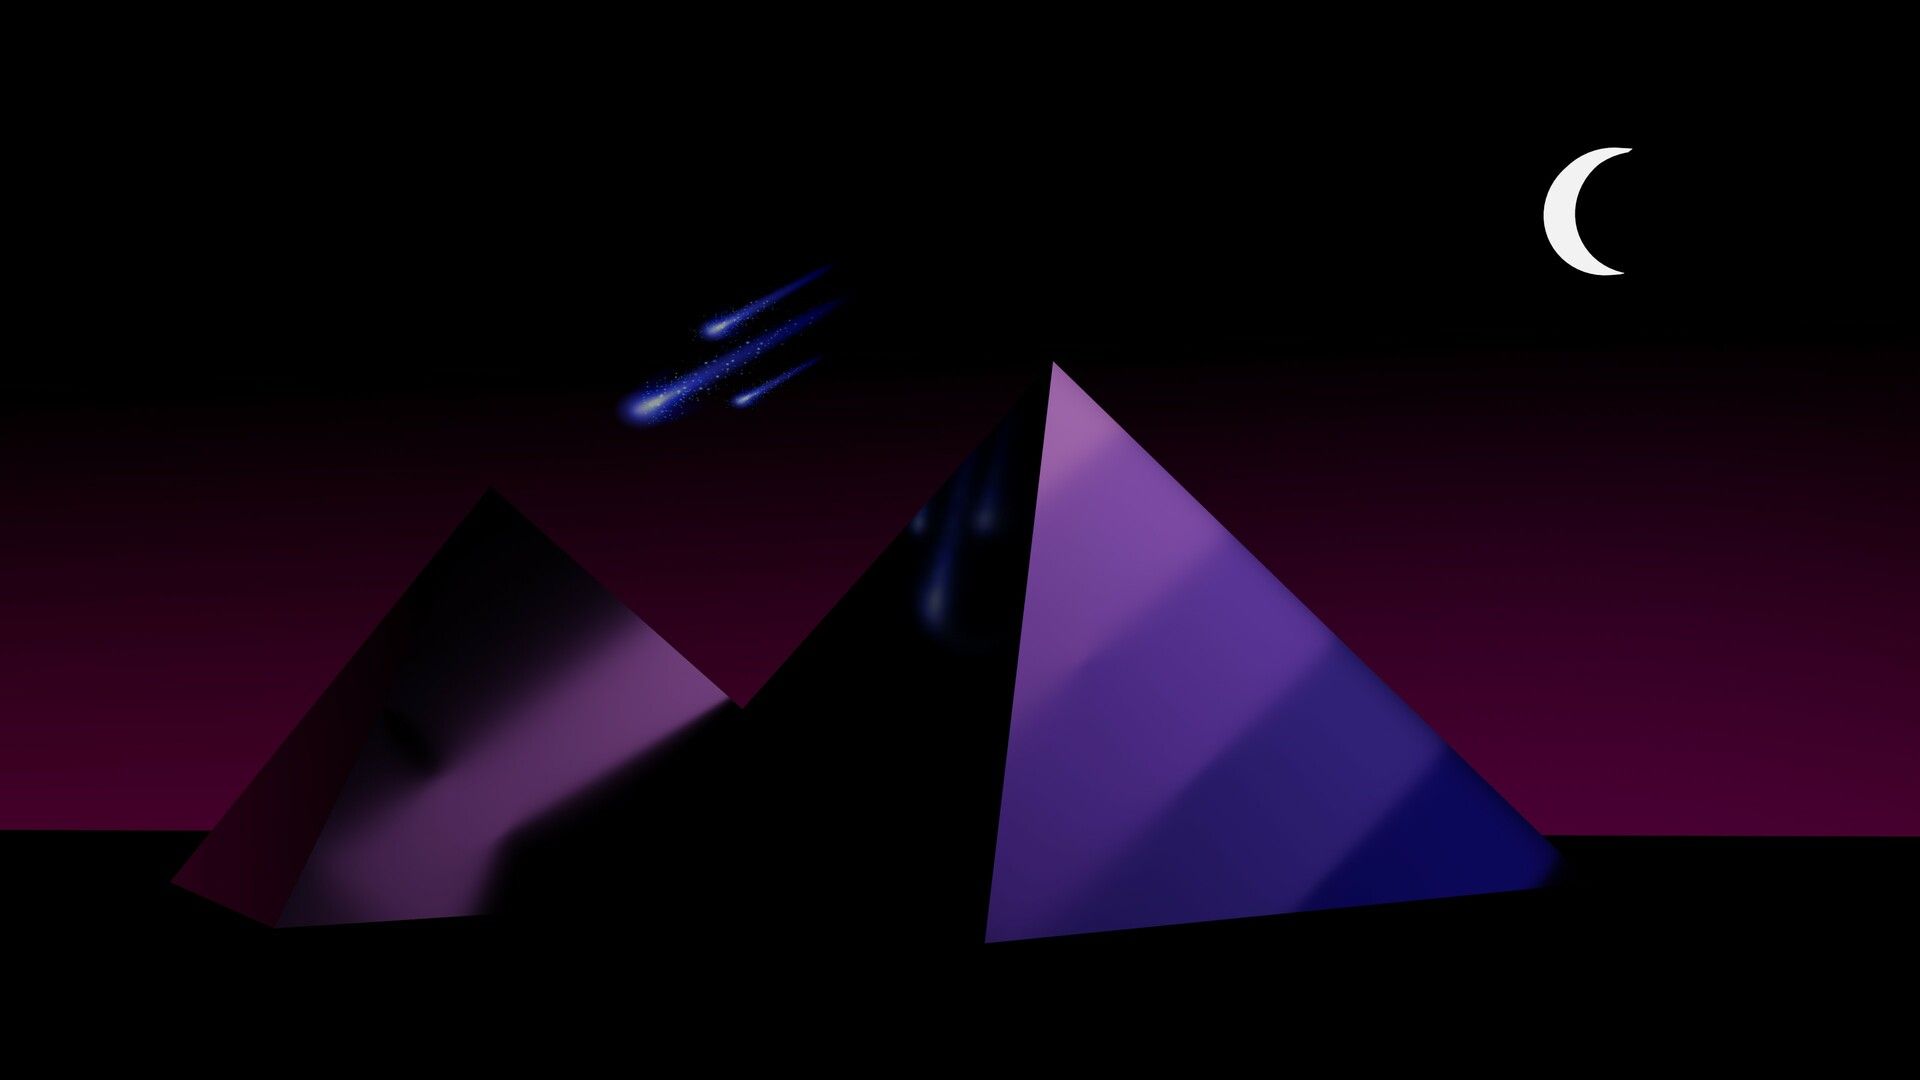 A purple pyramid with a shooting star and crescent moon in the background - Low poly